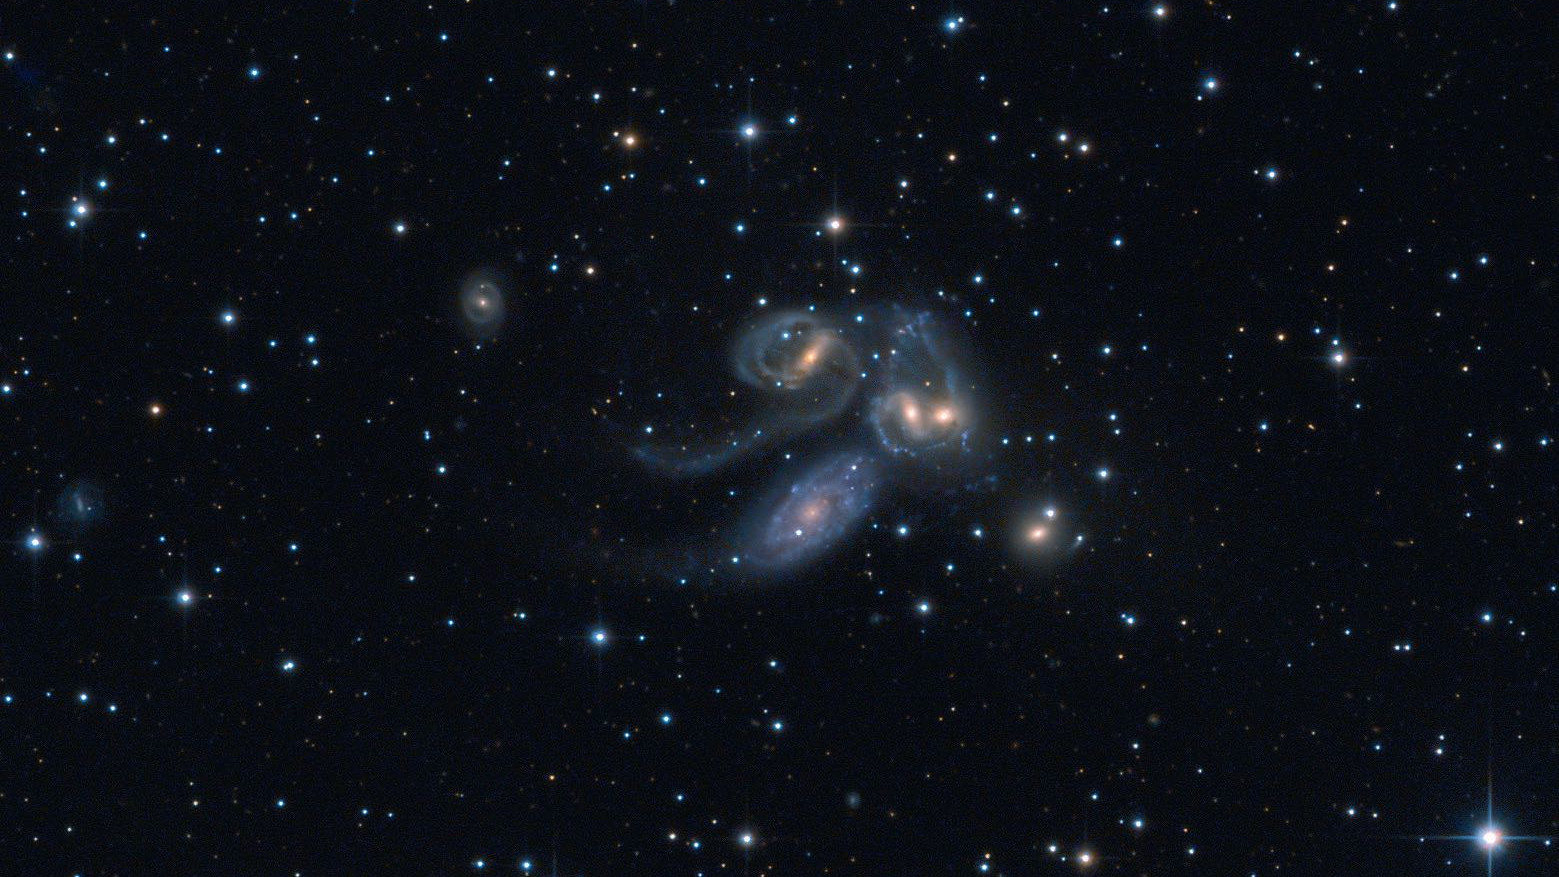 Stephan's Quintet: NGC 7320C (top left), NGC 7319, NGC 7318B and NGC 7318A and
 NGC 7217 (bottom right). NGC 7320 (bottom left) does not belong to the group. Wolfgang Promper
